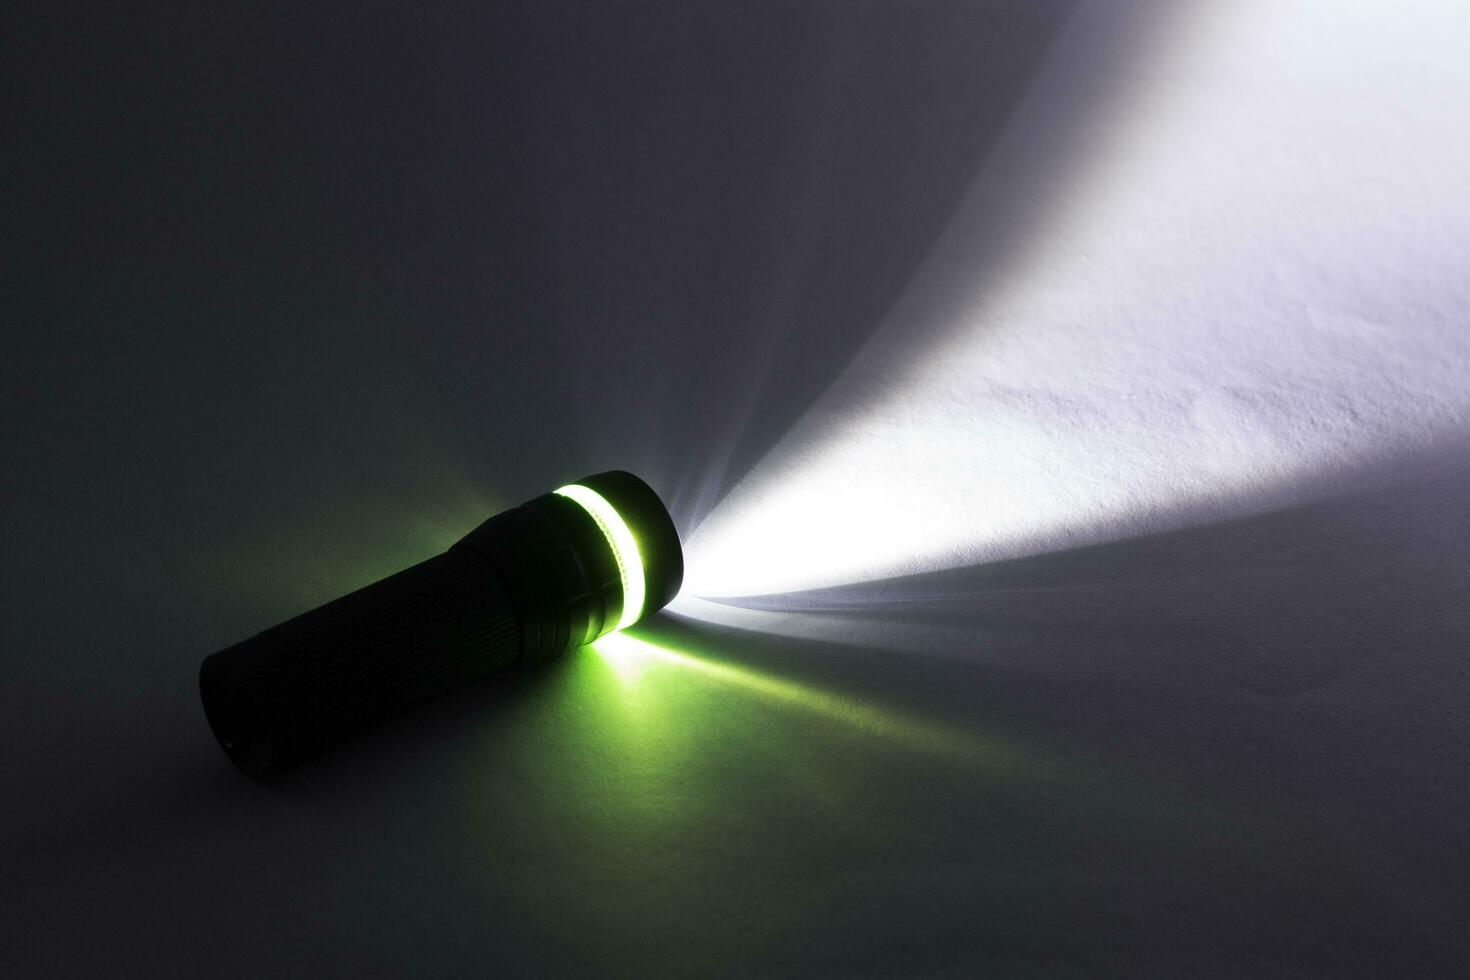 black flashlight lighting up shines green and white ray light beam torch. object emergency electric tool energy lamp lantern led battery power for security search or direction view finding in dark. photo